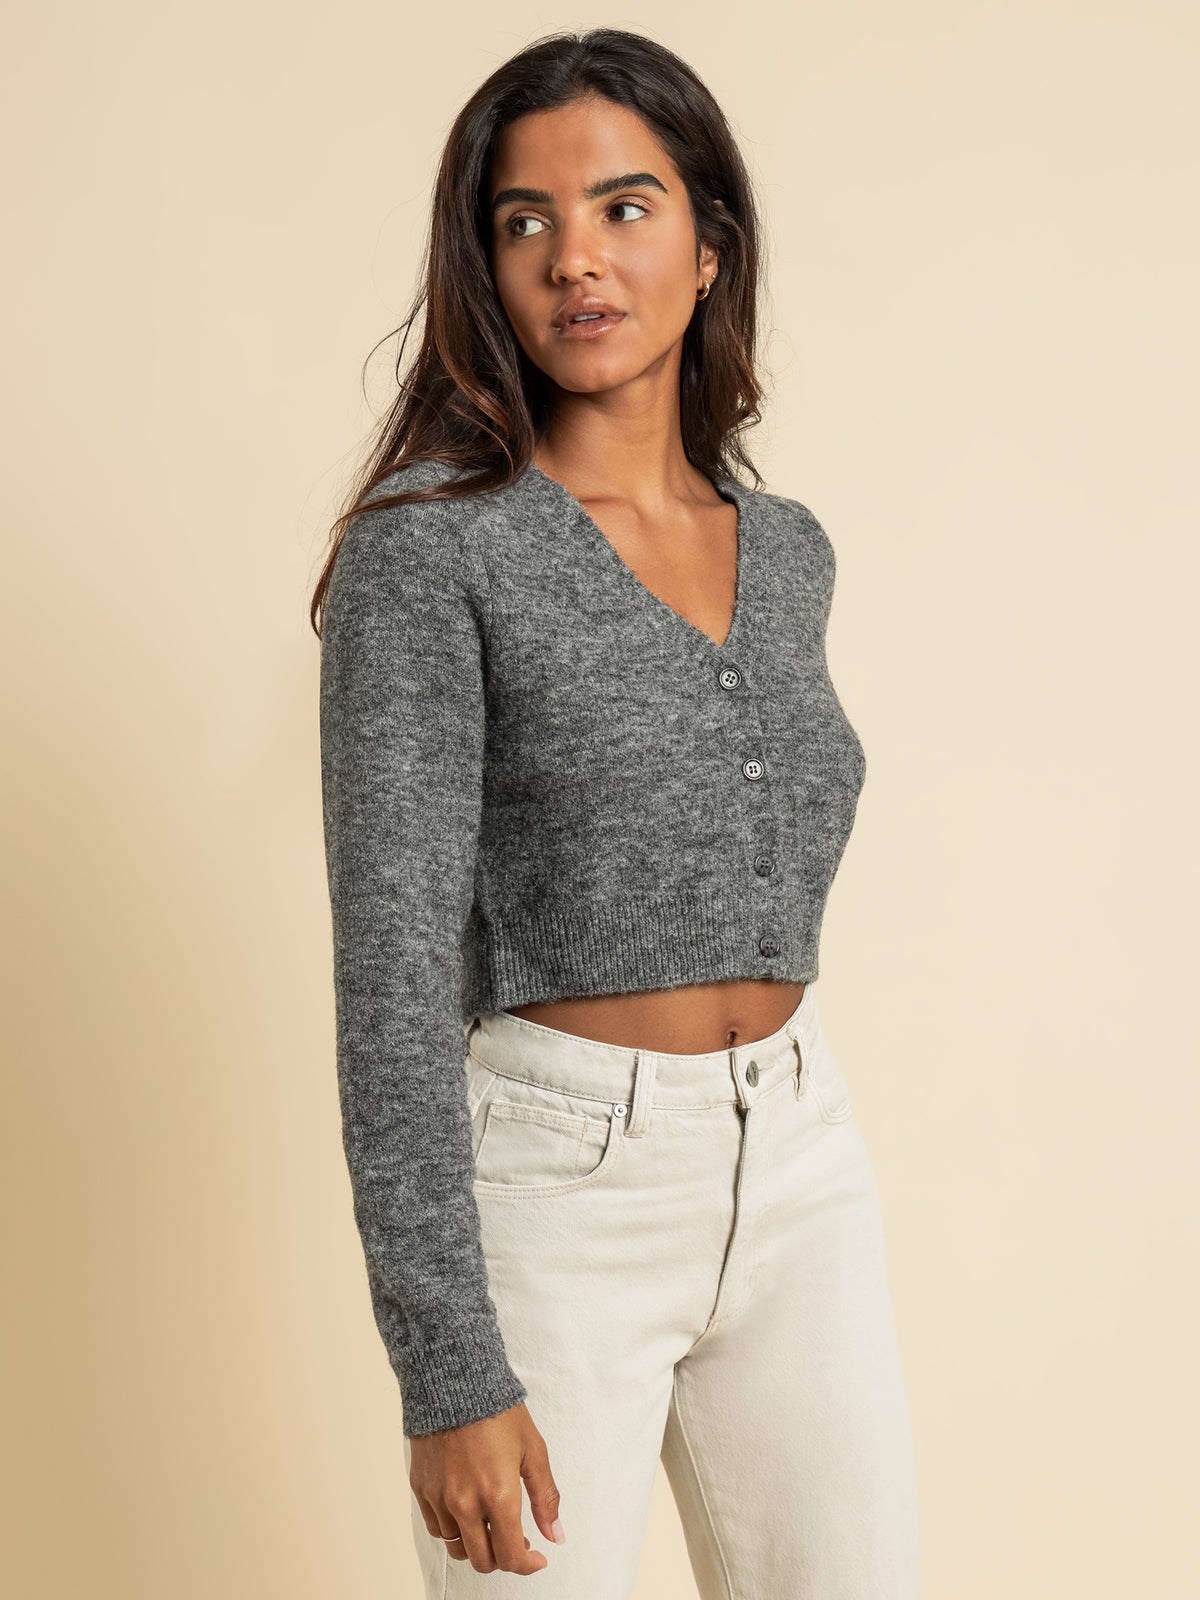 Heather Knit Cardi in Charcoal Marle